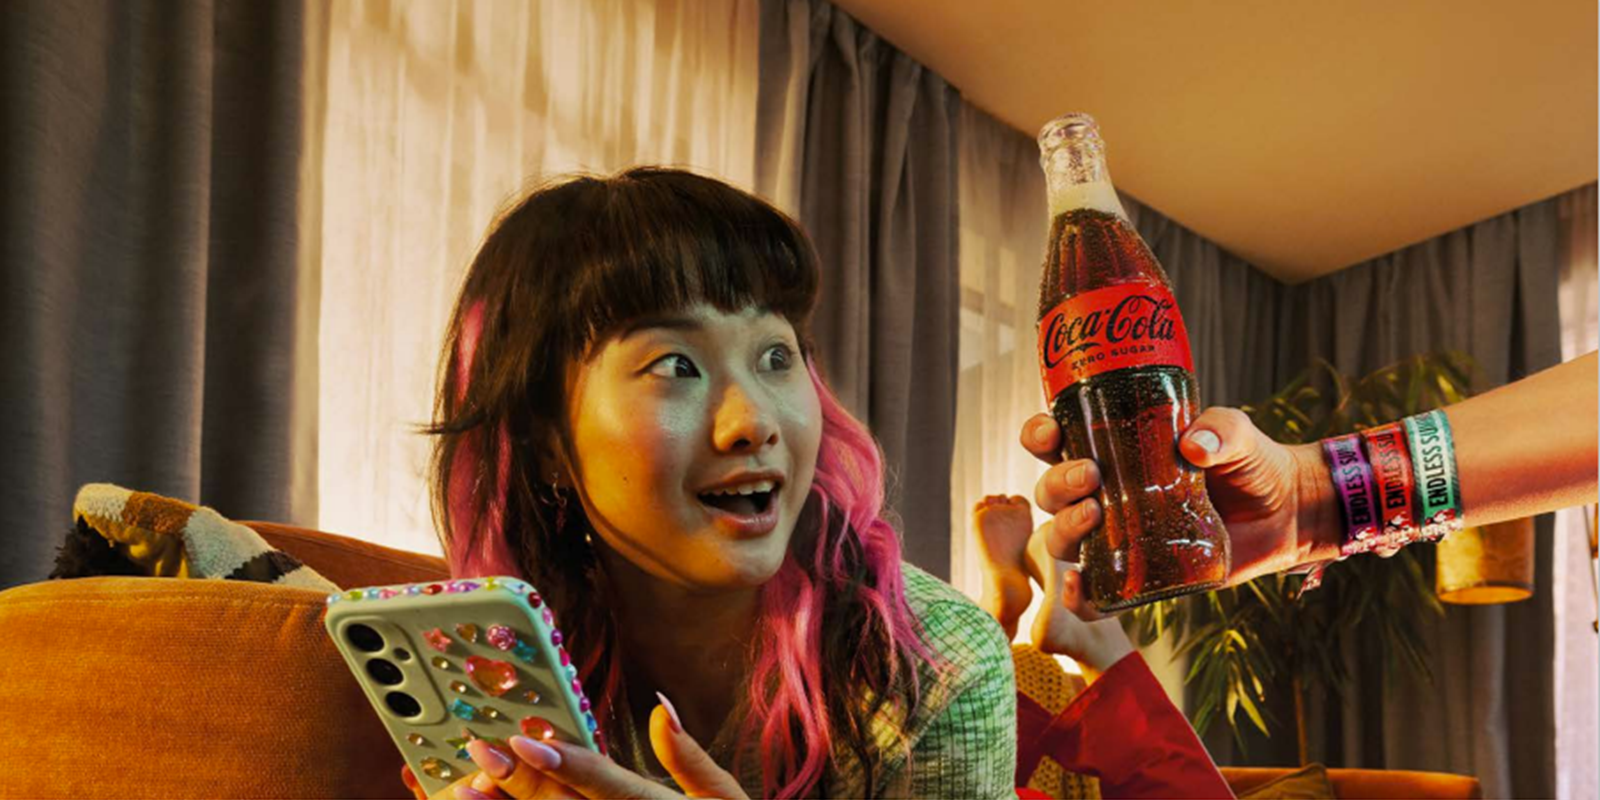 teen scrolling phone and a glass bottle of coca-cola